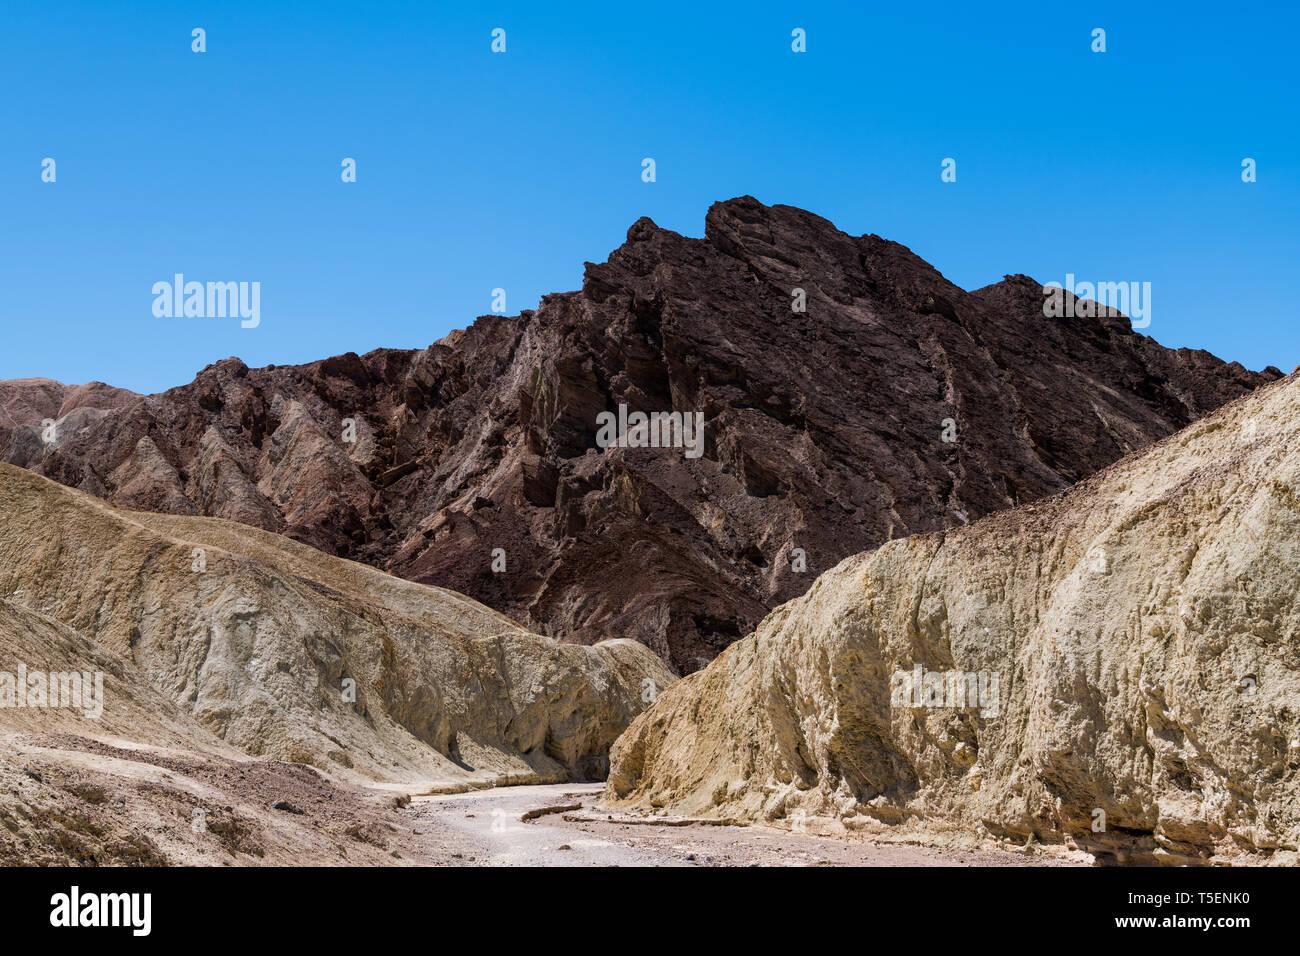 A dry riverbed cuts a pathway through a colorful desert canyon landscape to a rugged mountain peak - Golden Canyon in Death Valley National Park Stock Photo